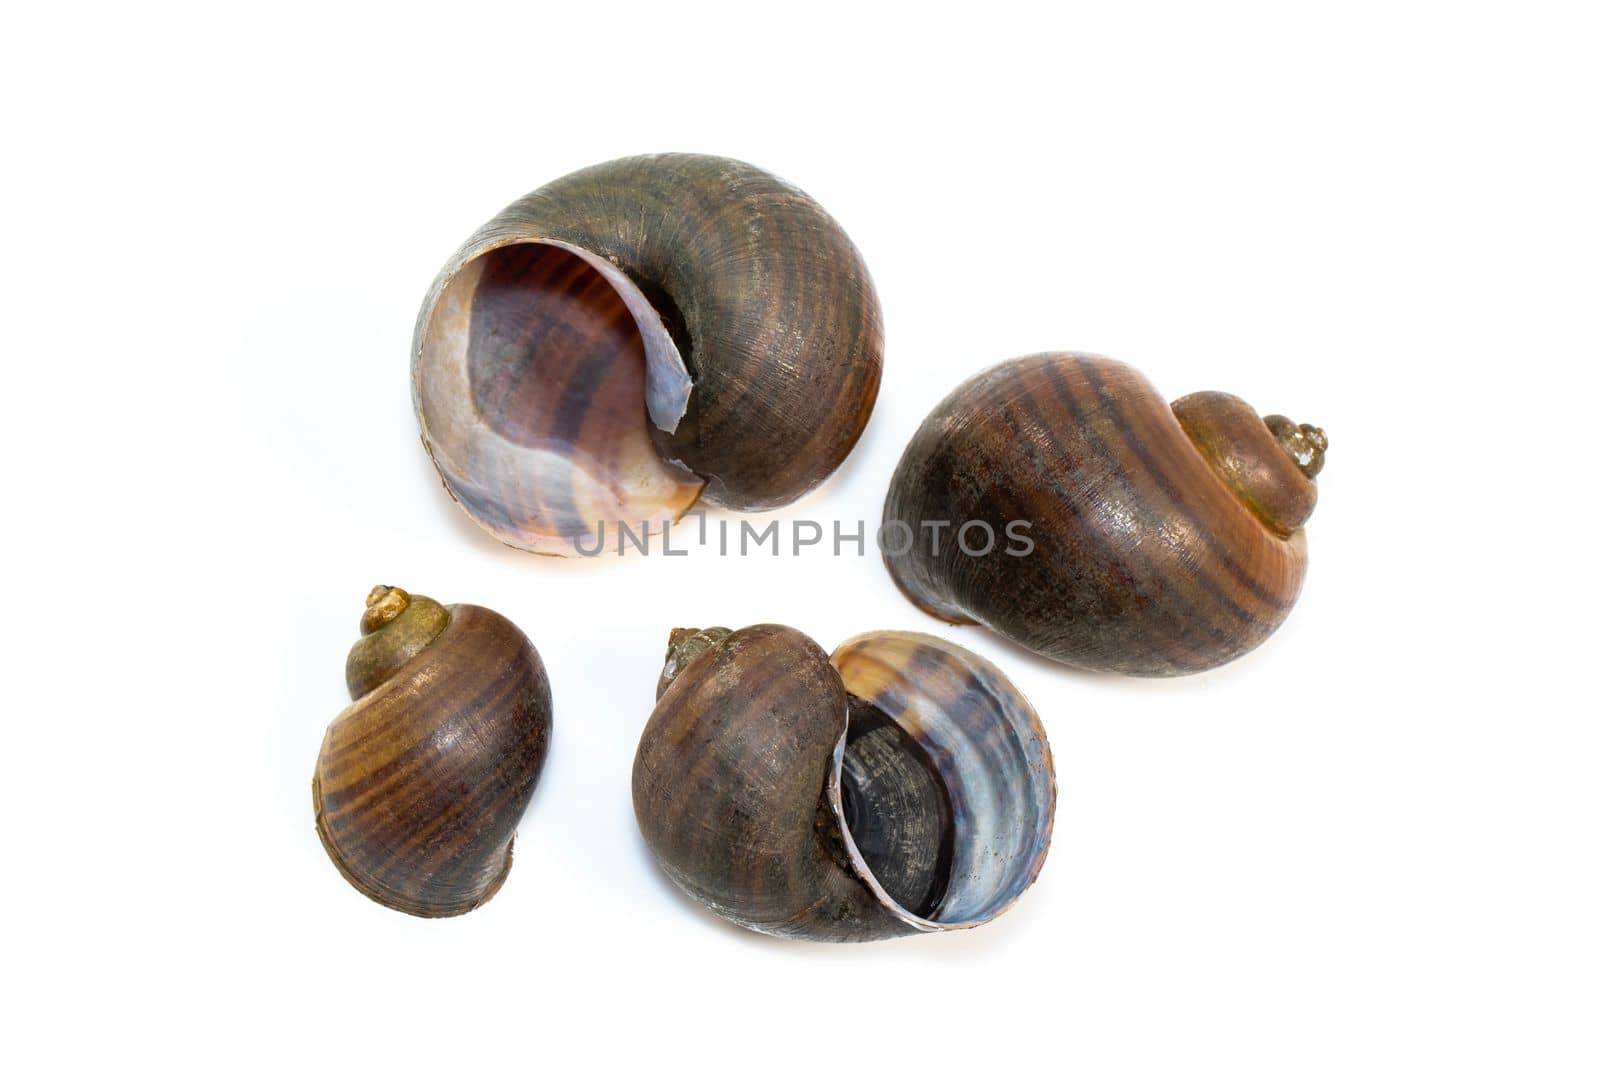 Group of apple snail (Pila ampullacea) isolated on white background. Animal. by yod67